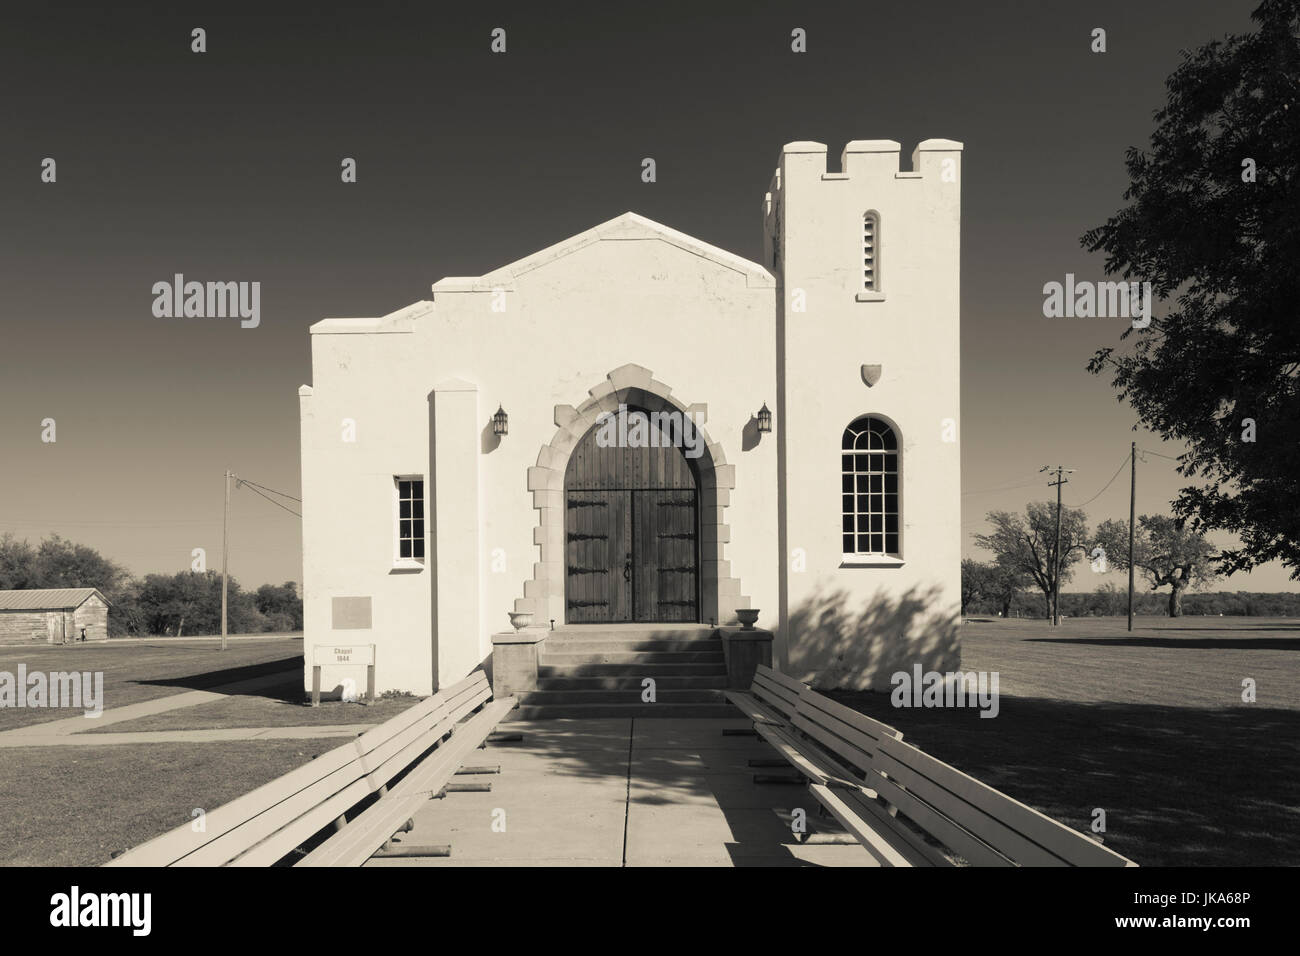 USA, Oklahoma, El Reno, Fort Reno, former Indian Wars military outpost and POW camp for German prisoners in World War Two, chapel builts by German POWs, exterior Stock Photo